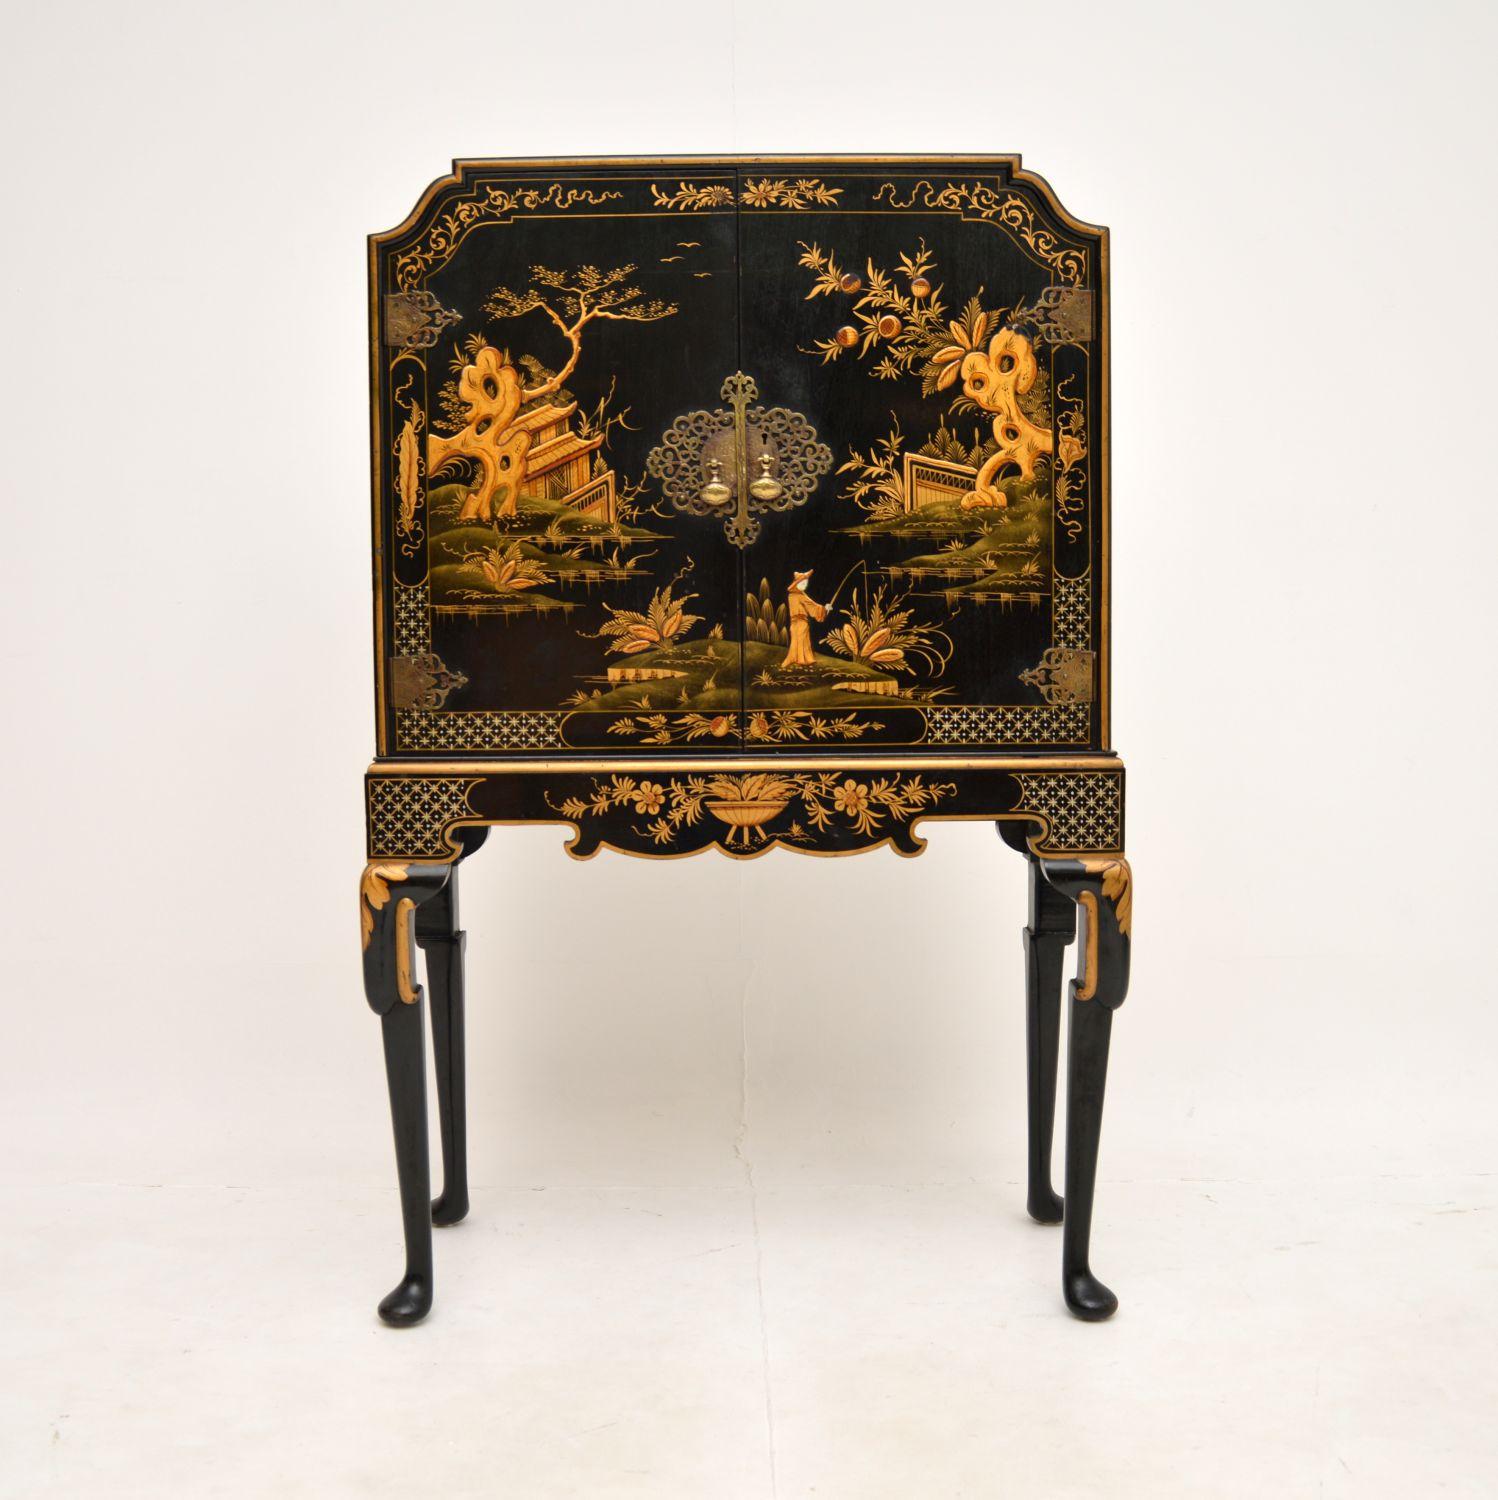 A superb antique lacquered chinoiserie cocktail drinks cabinet in the Queen Anne style. This was made in England, it dates from around the 1920’s.

The quality is exceptional, this is an unusually petite and useful size. The cabinet is beautifully